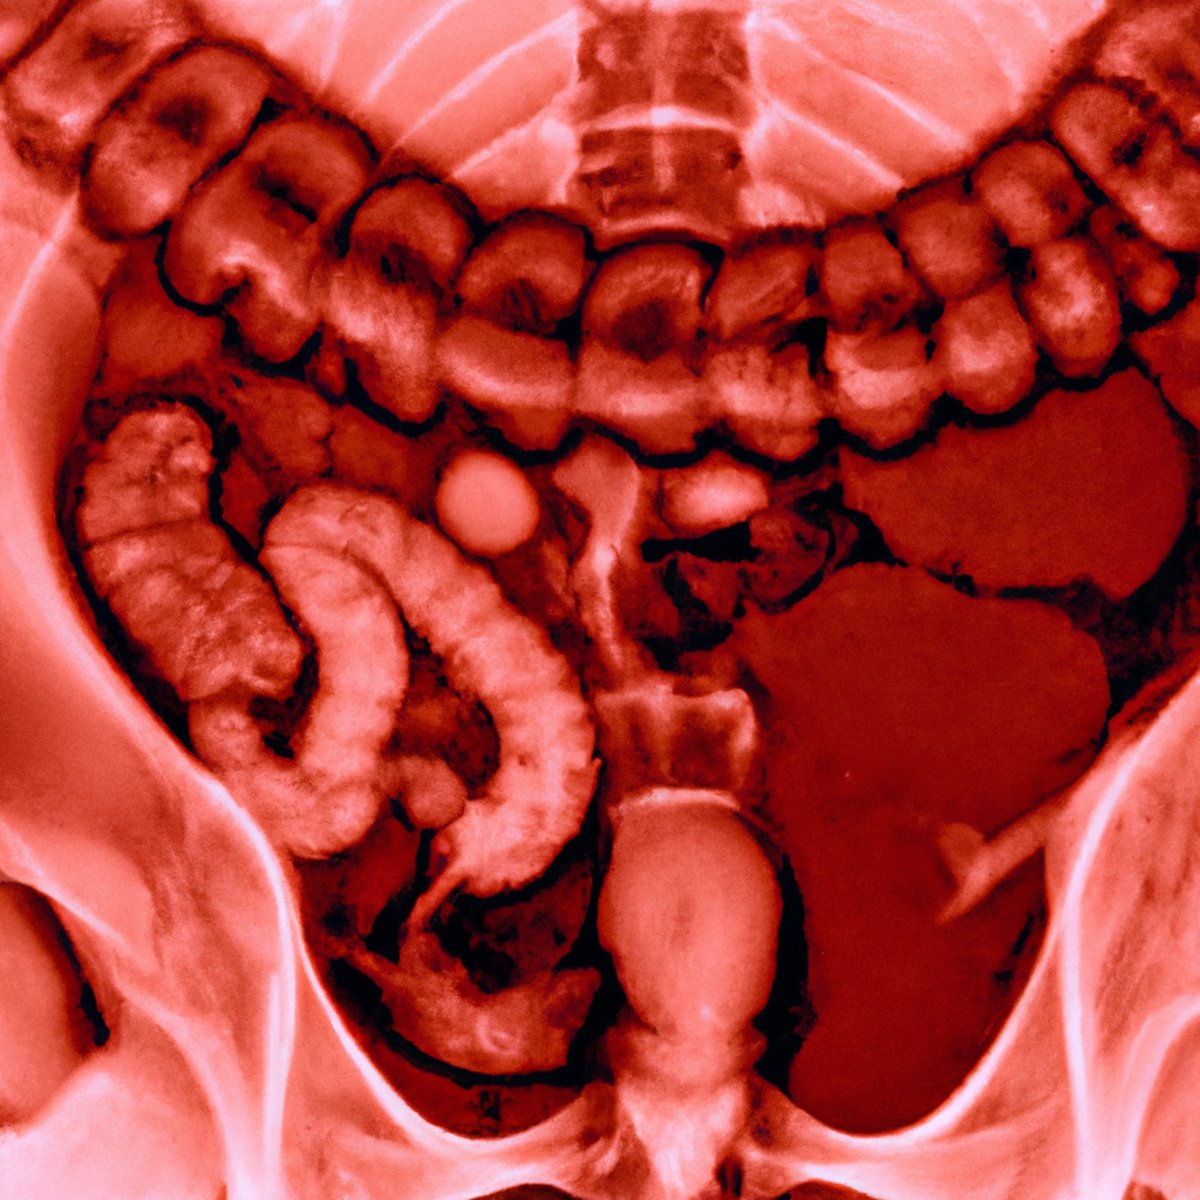 Close-up view of a stomach with Menetrier's Disease, showing enlarged folds and thickened mucous membrane.